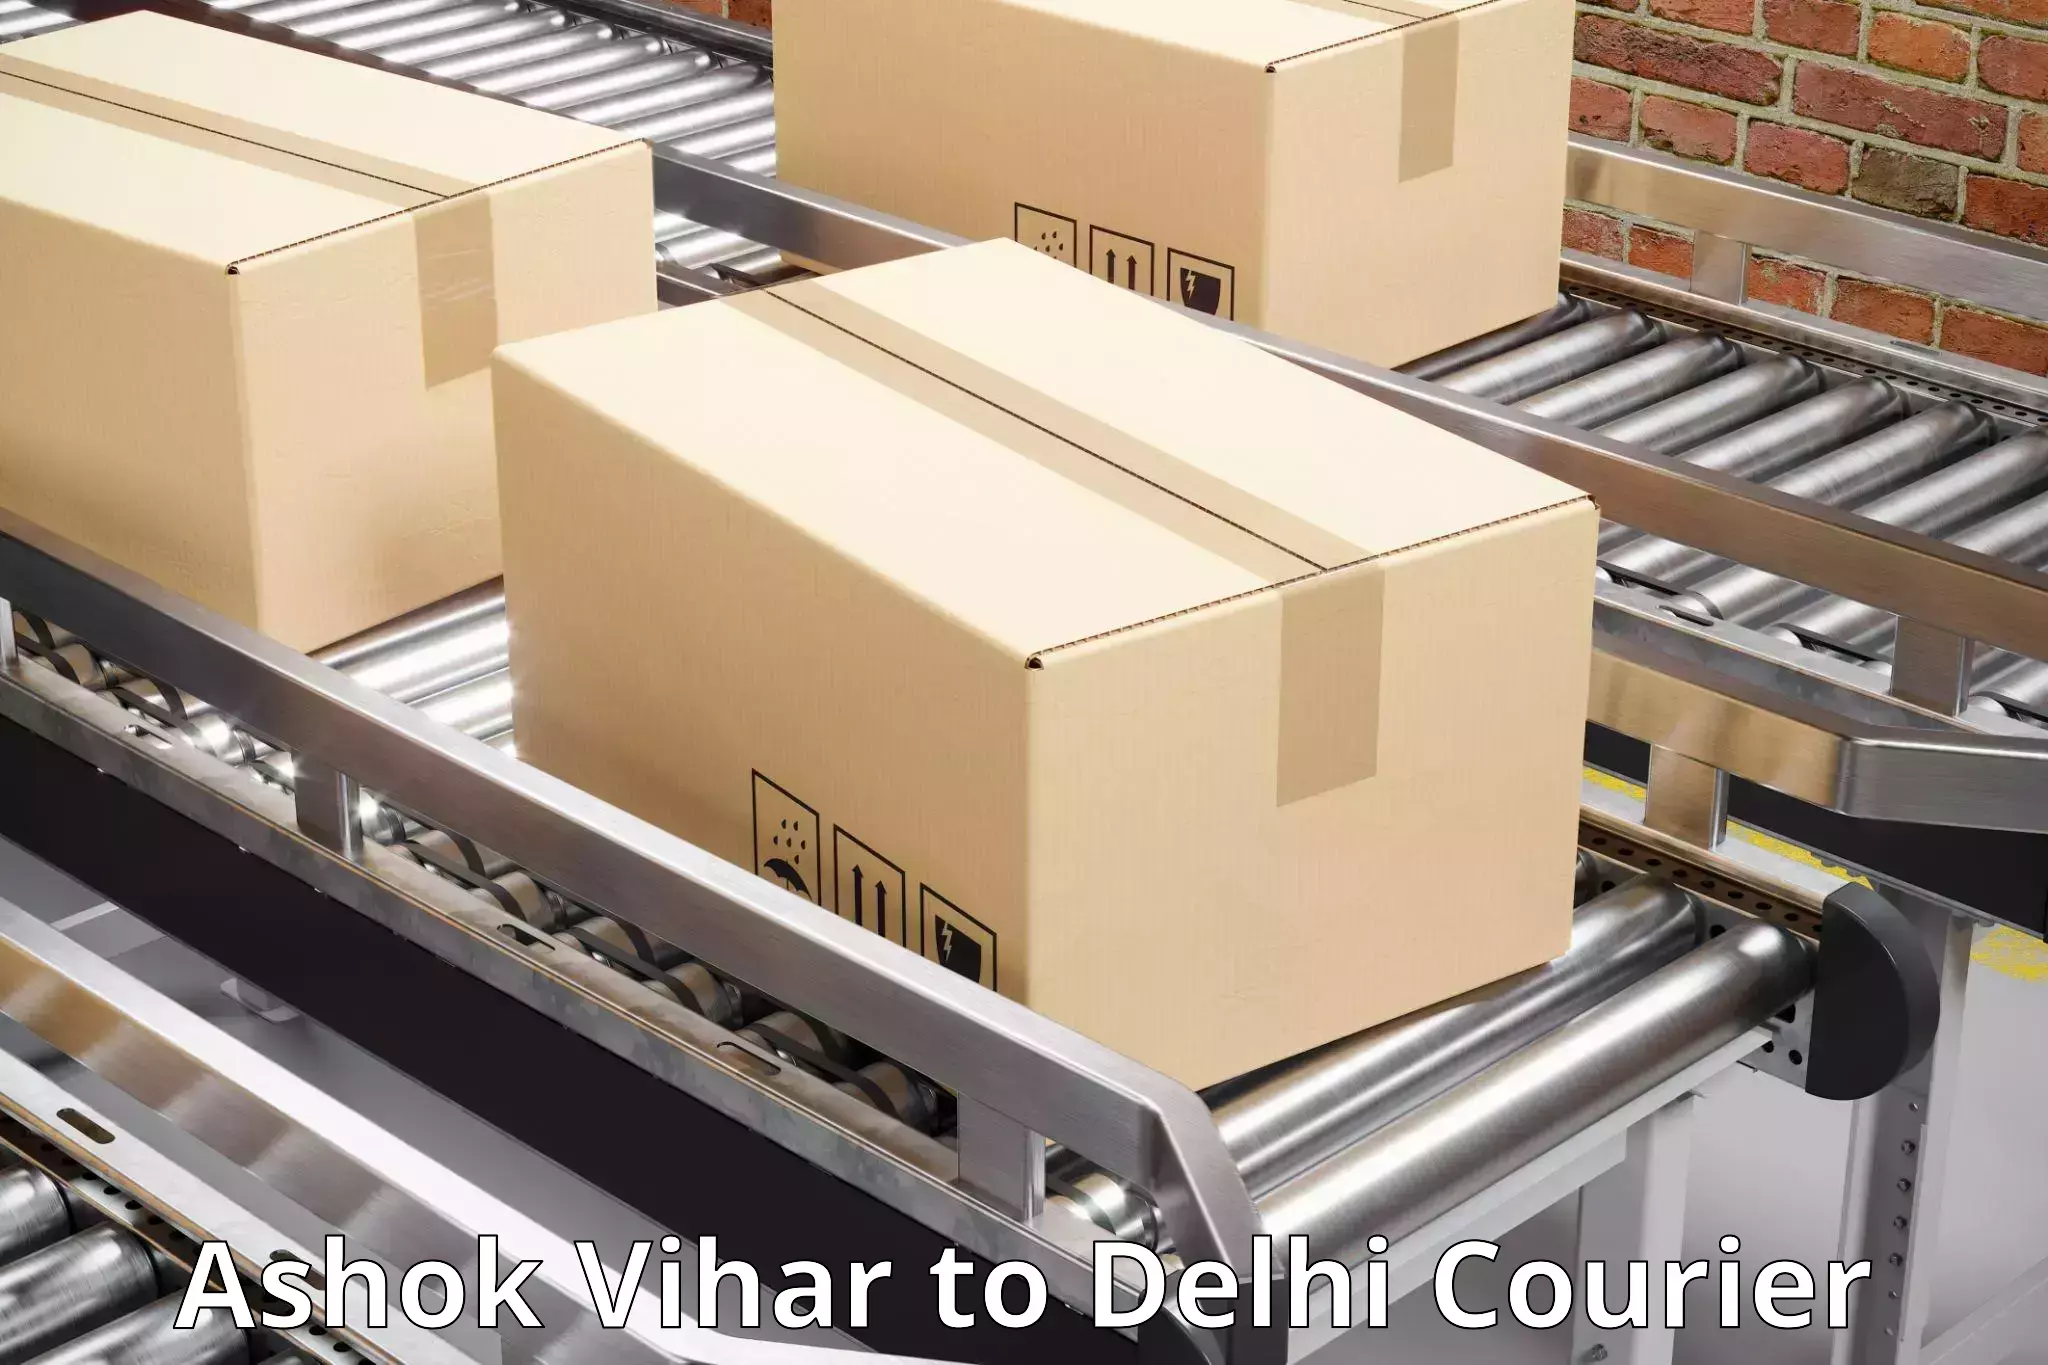 User-friendly delivery service Ashok Vihar to Lodhi Road